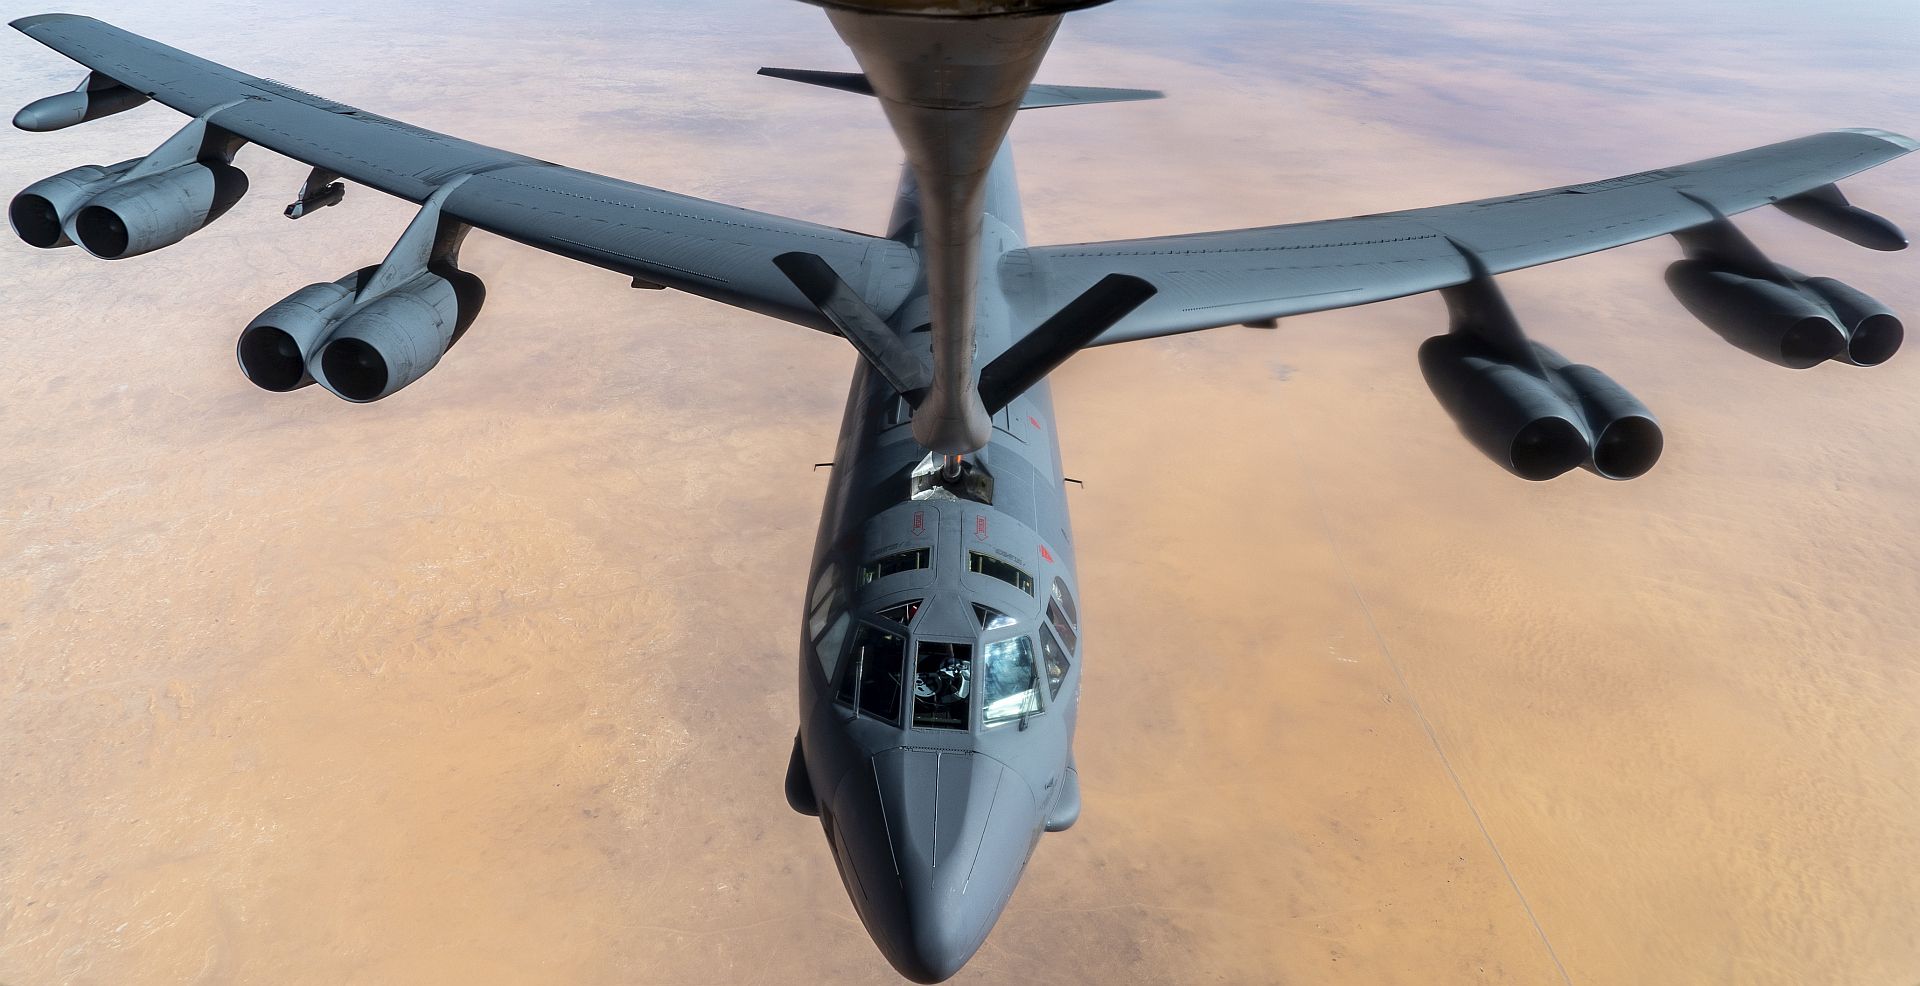 135 Stratotanker From The 28th Expeditionary Aerial Refueling Squadron